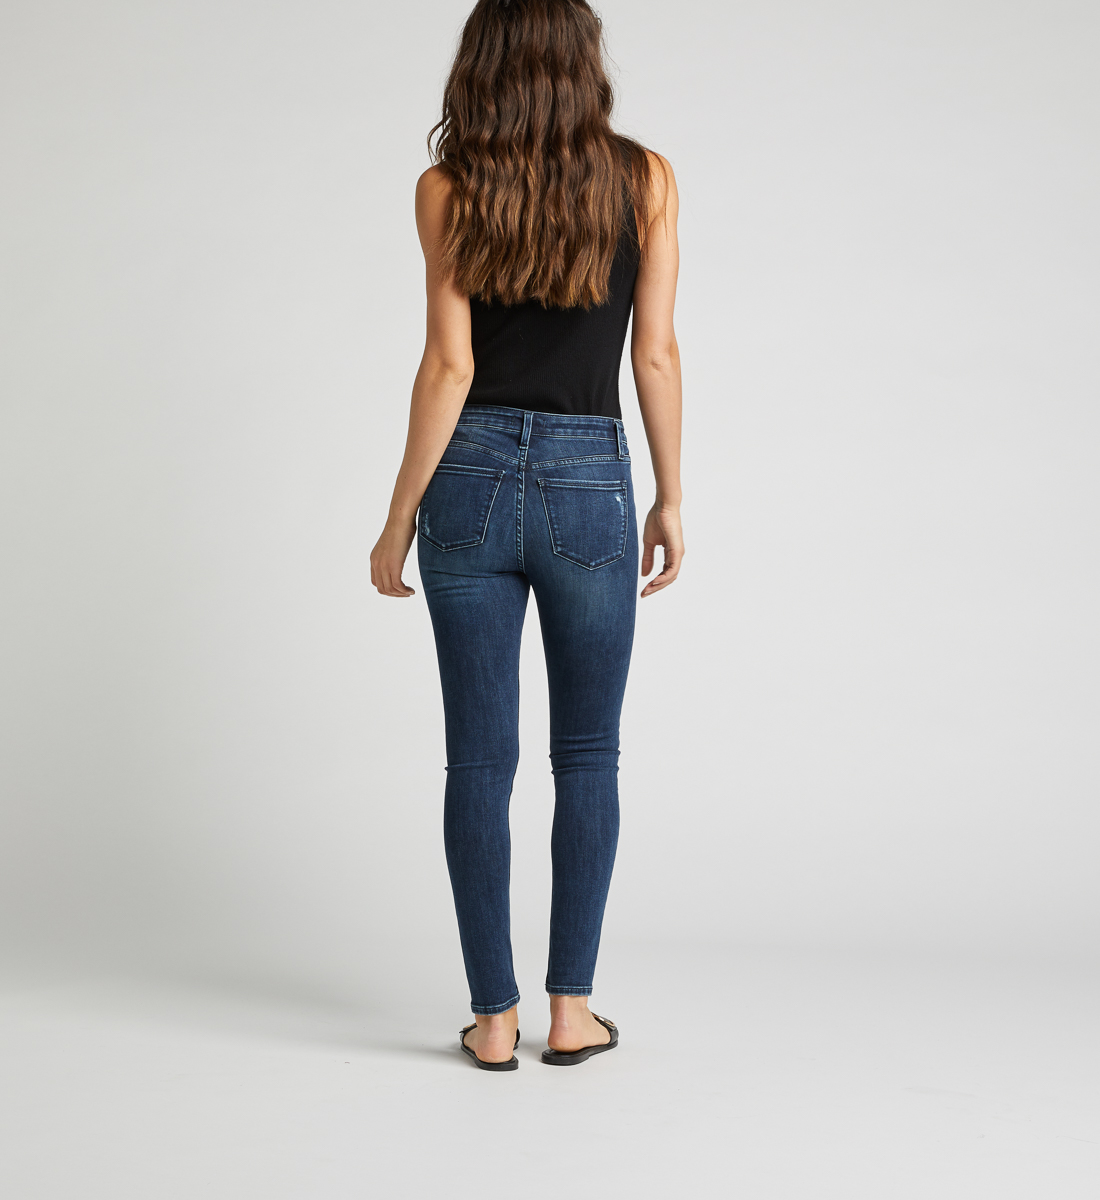 Most Wanted Mid Rise Skinny Leg Jeans - Silver Jeans US